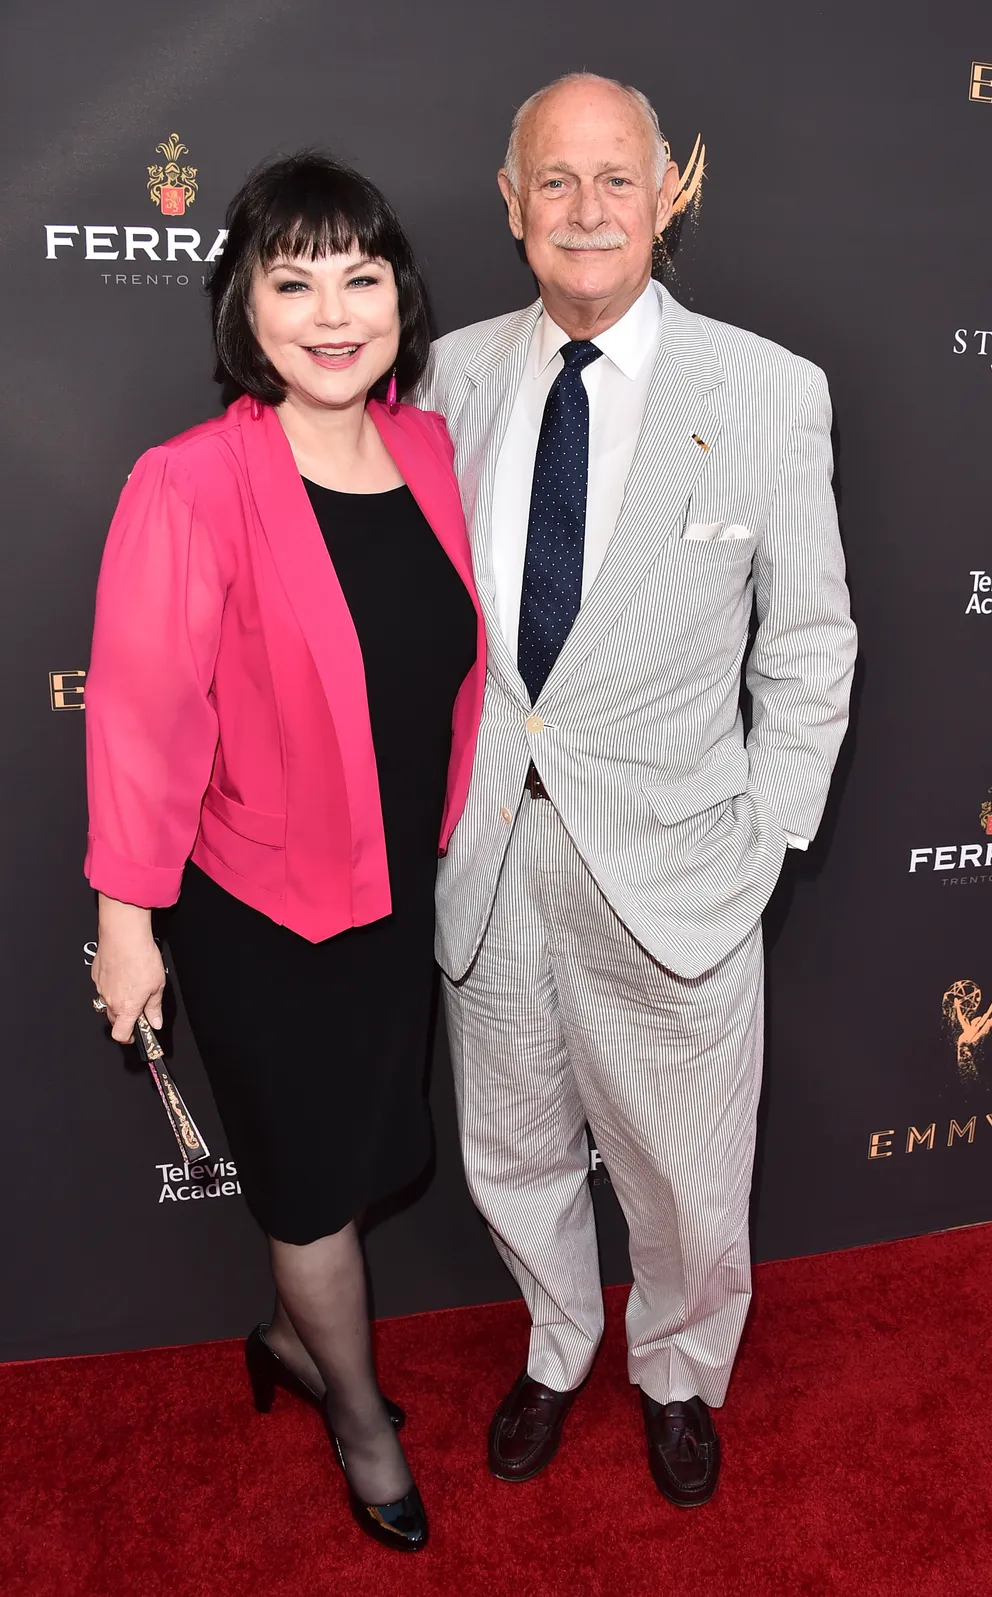 Actors Delta Burke and Gerald McRaney attend the Television Academy's Performers Peer Group Celebration at The Montage Beverly Hills on August 21, 2017 in Beverly Hills, California.